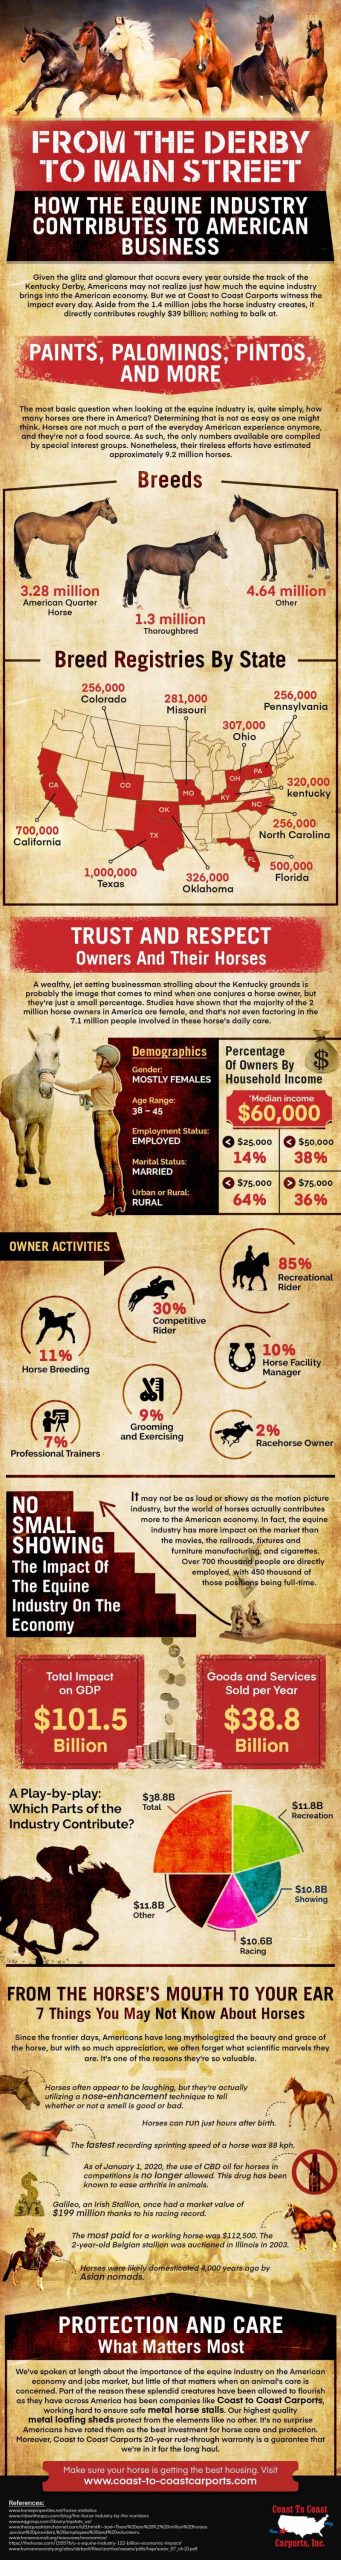 How the Equine Industry Contributes to American Business